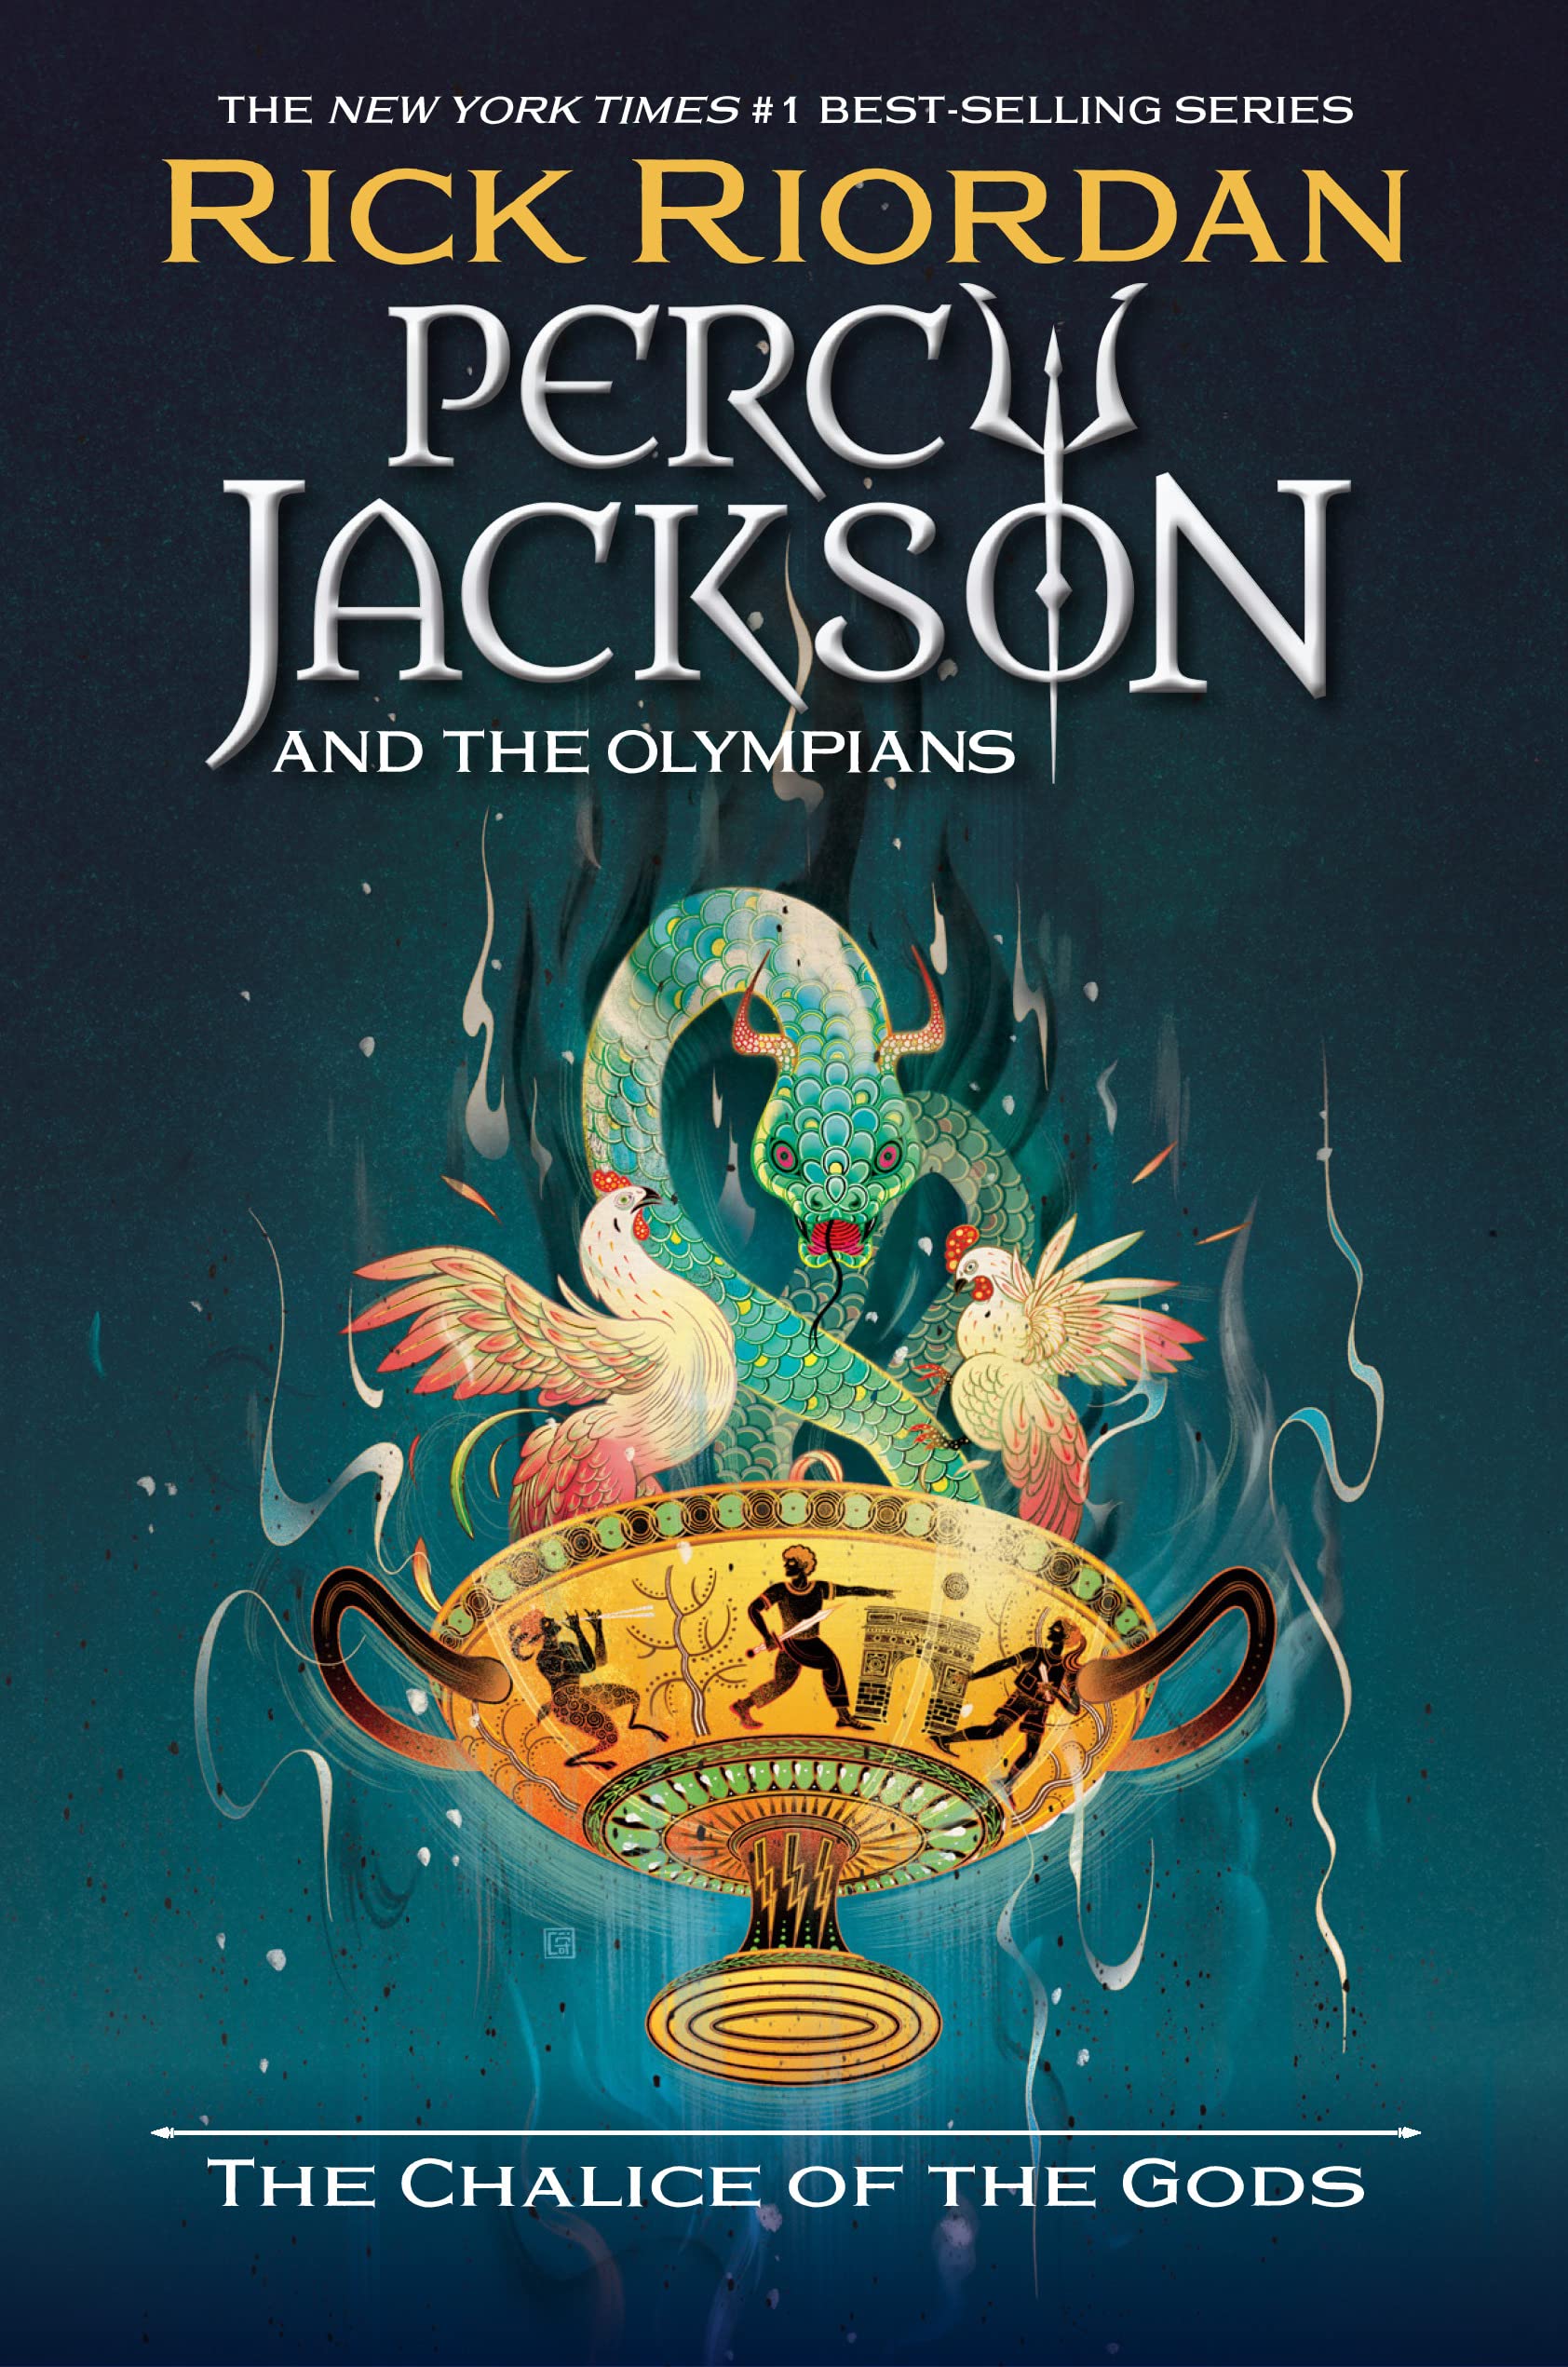 (PDF) The Chalice of the Gods (Percy Jackson and the Olympians, #6) By _ (Rick Riordan).pdf